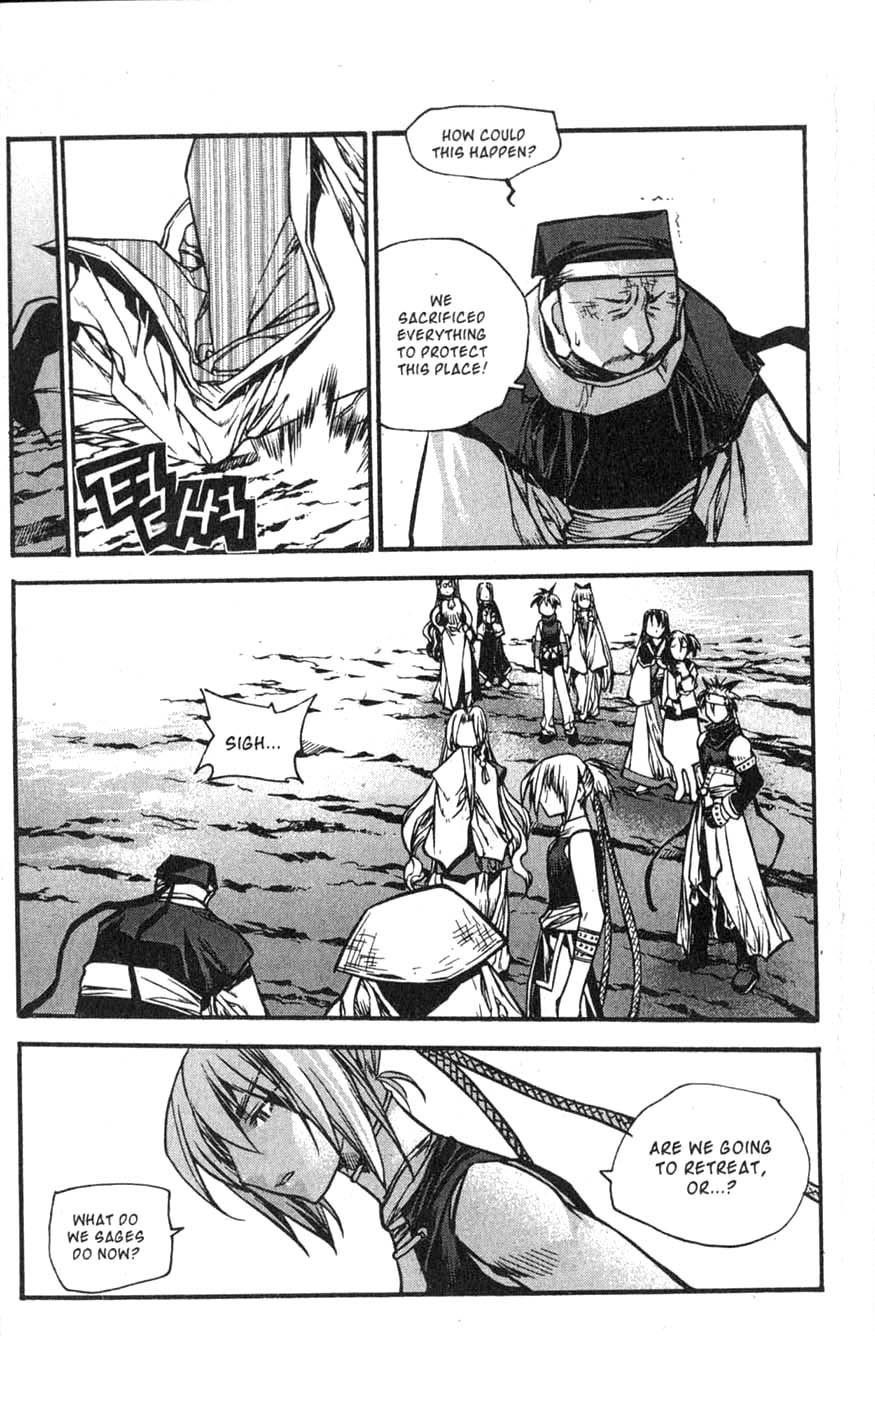 Chronicles of the Cursed Sword Vol. 17 Ch. 68 The Heavenly Beacon